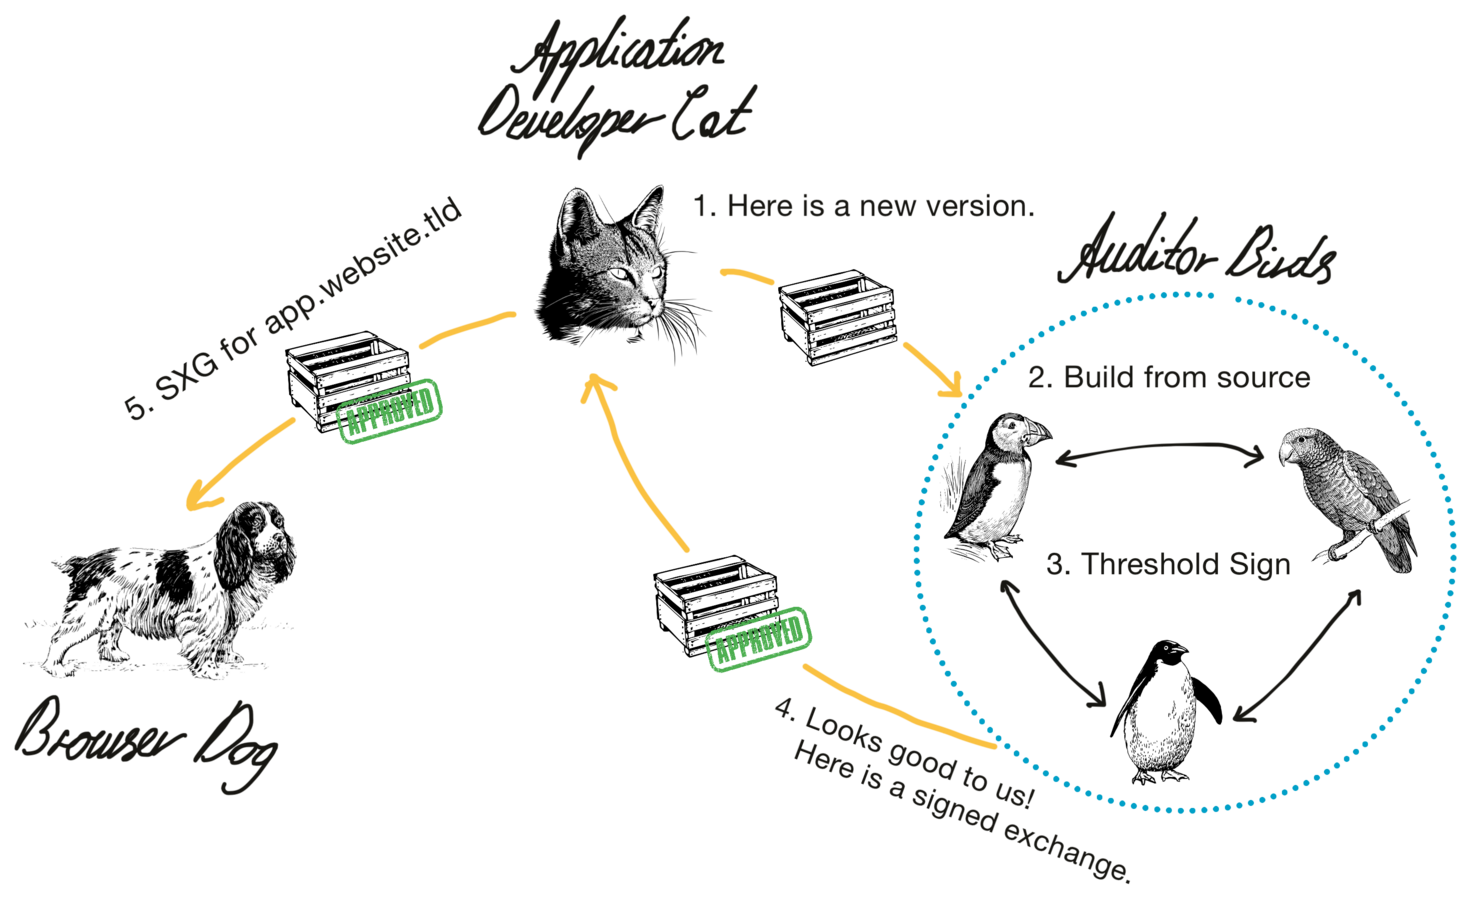 illustration showing the information flow in the protocol